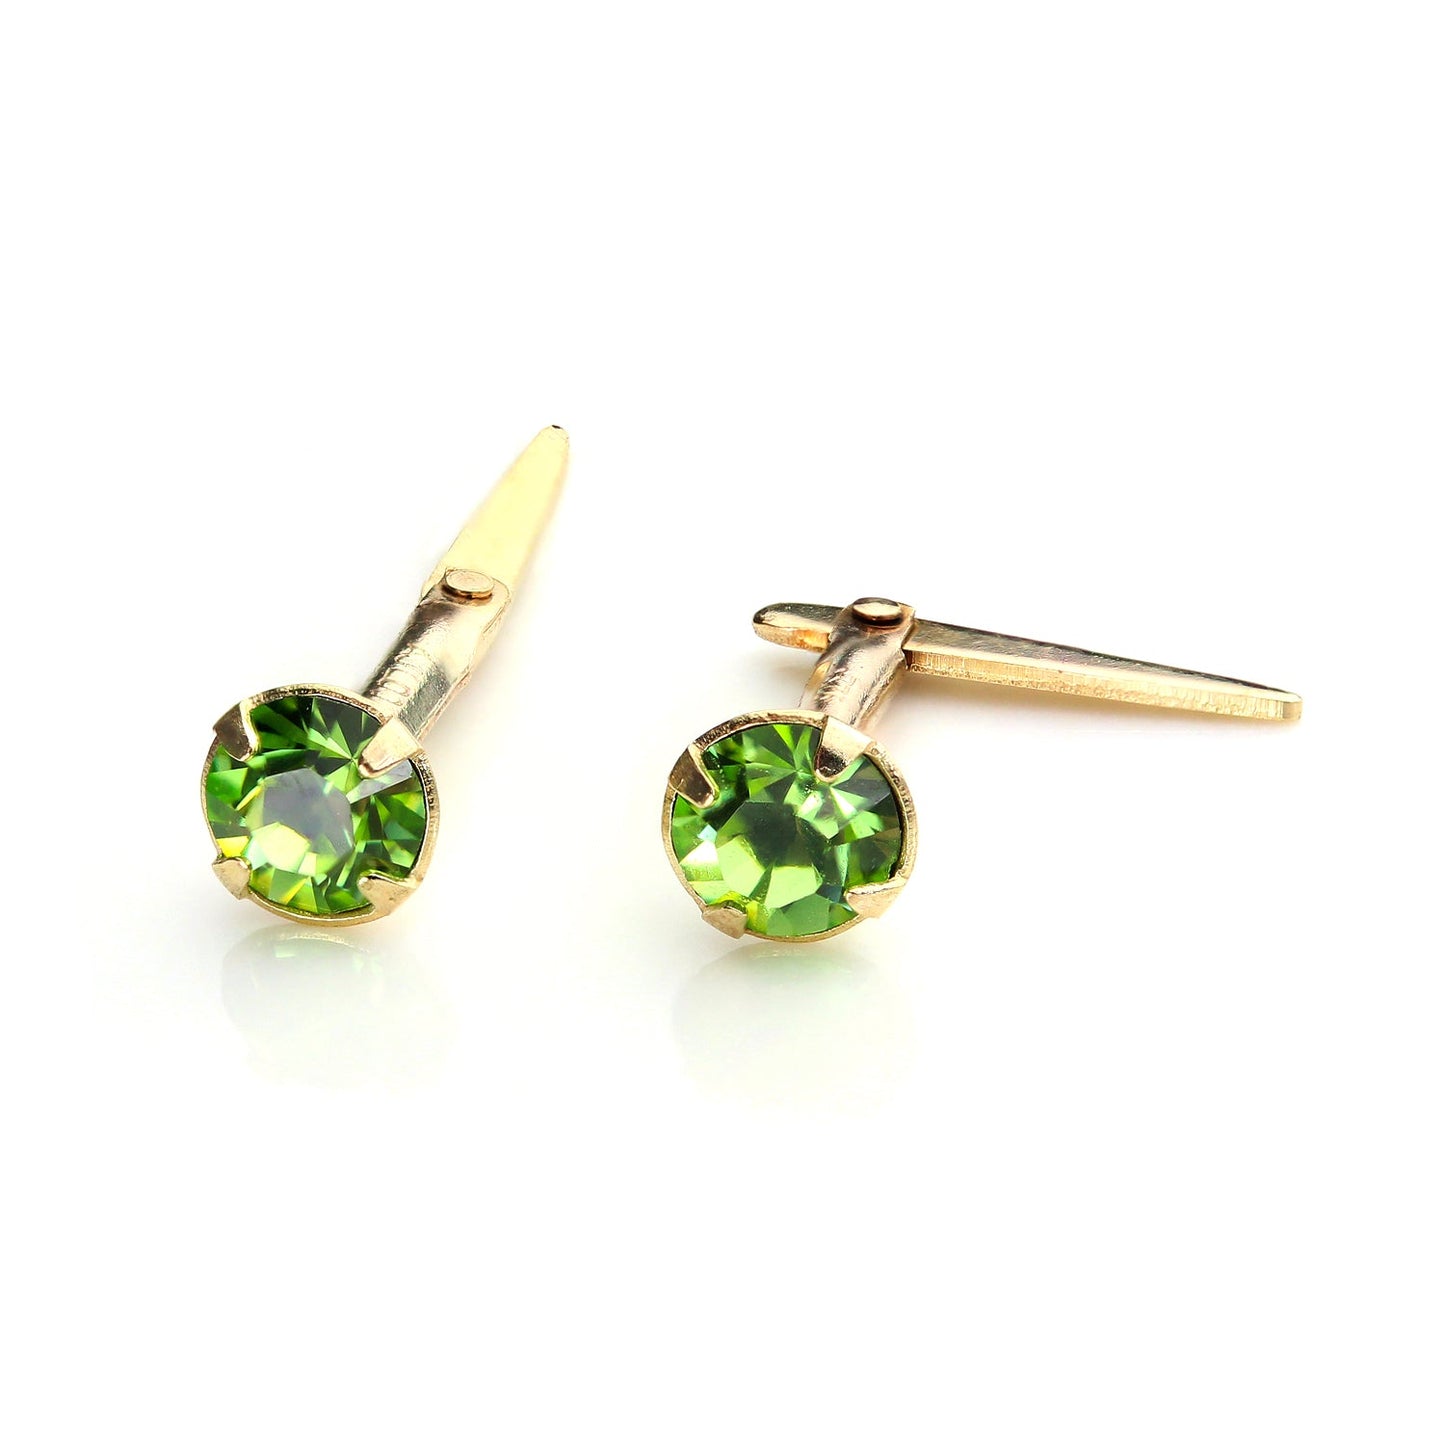 9ct Gold Andralok Stud Earrings with 3mm Crystal